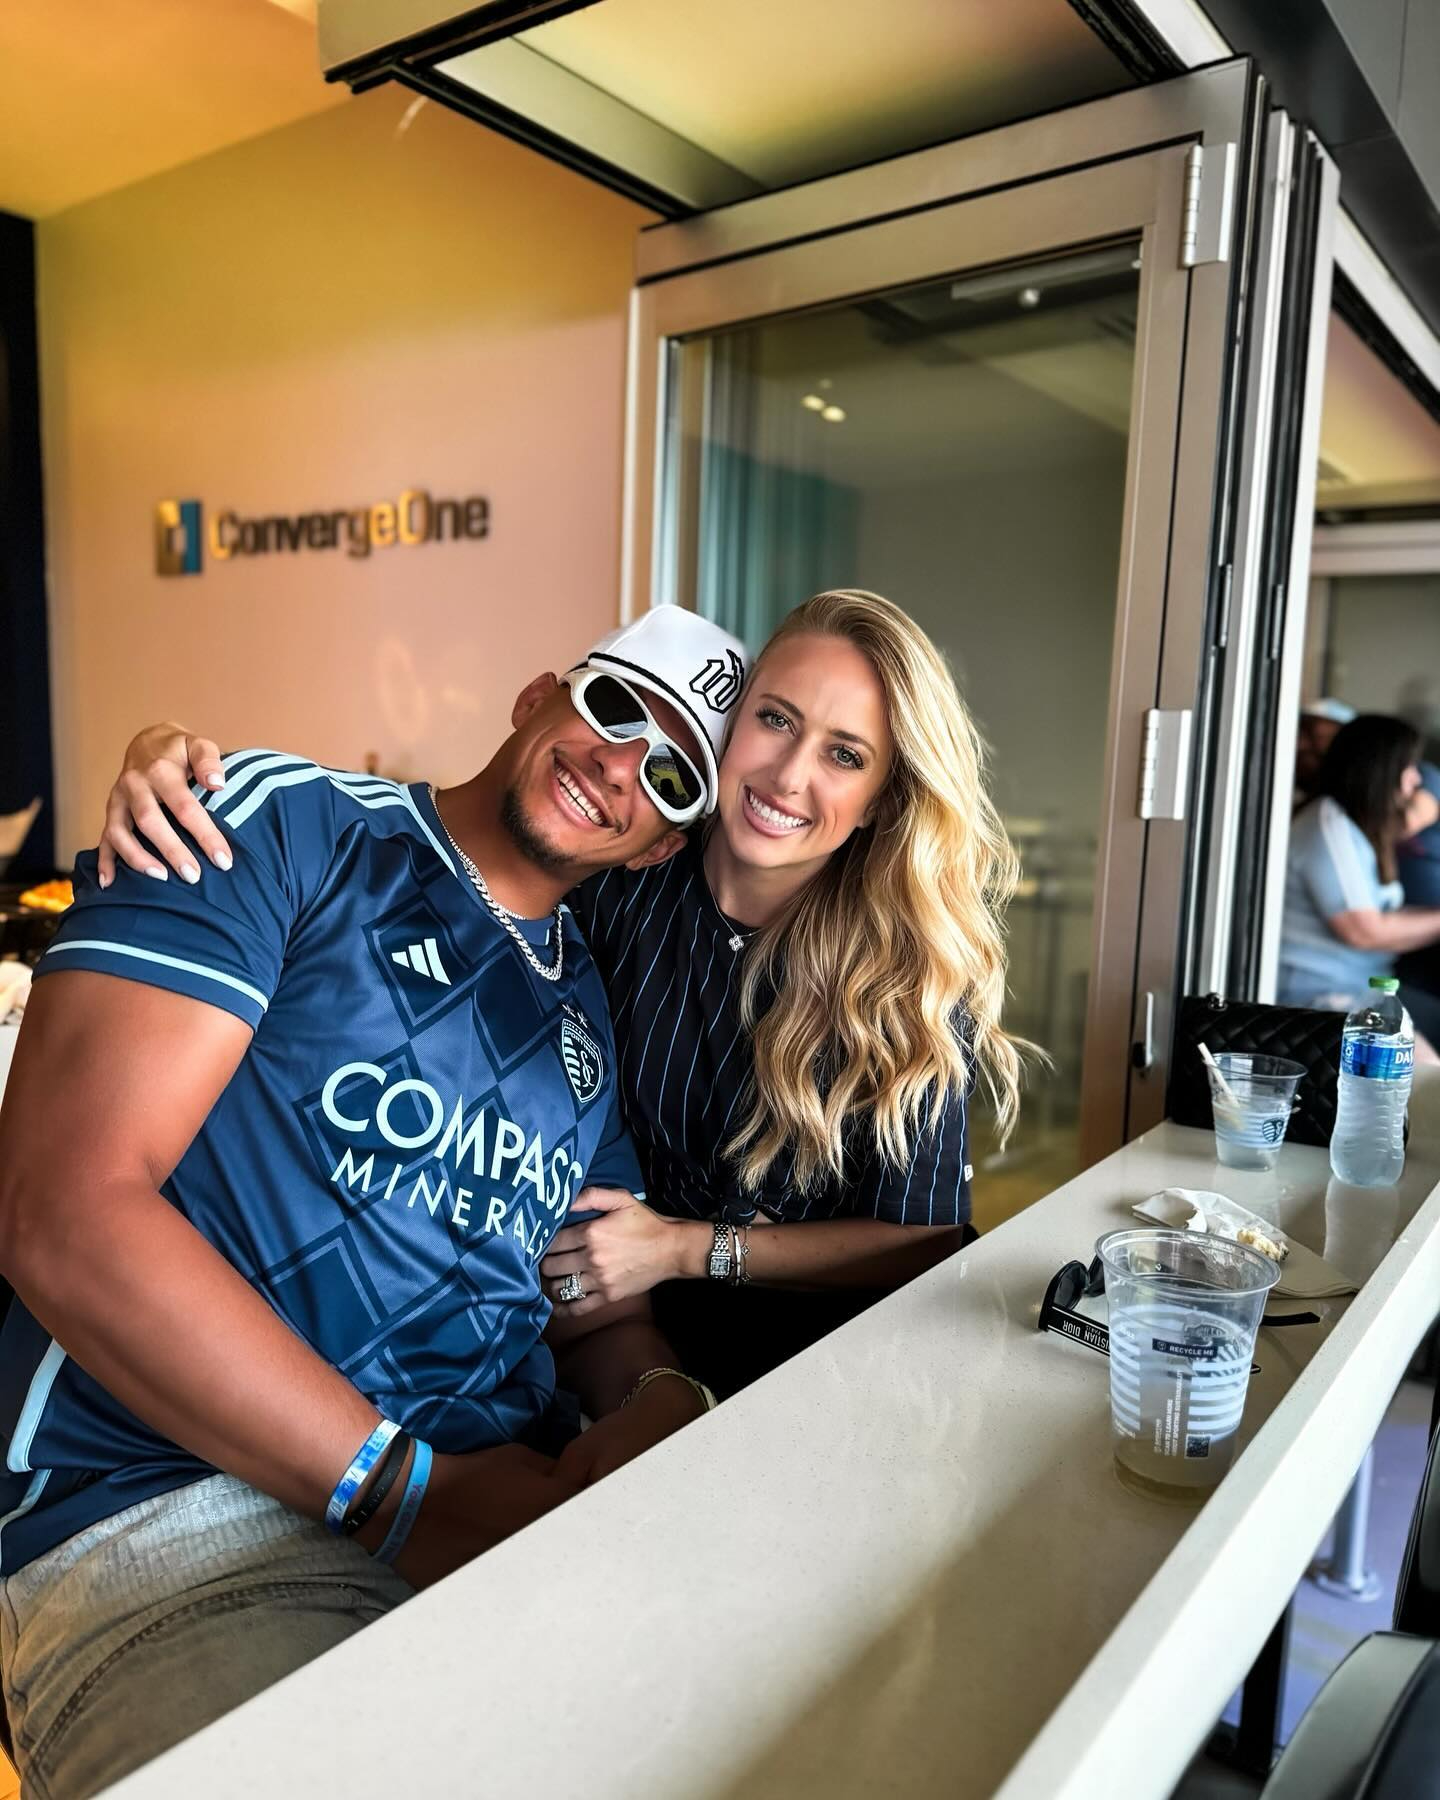 Patrick and Brittany donned matching blue jerseys for a Sporting Kansas City game as the local team beat Seattle Sounders FC 2-1